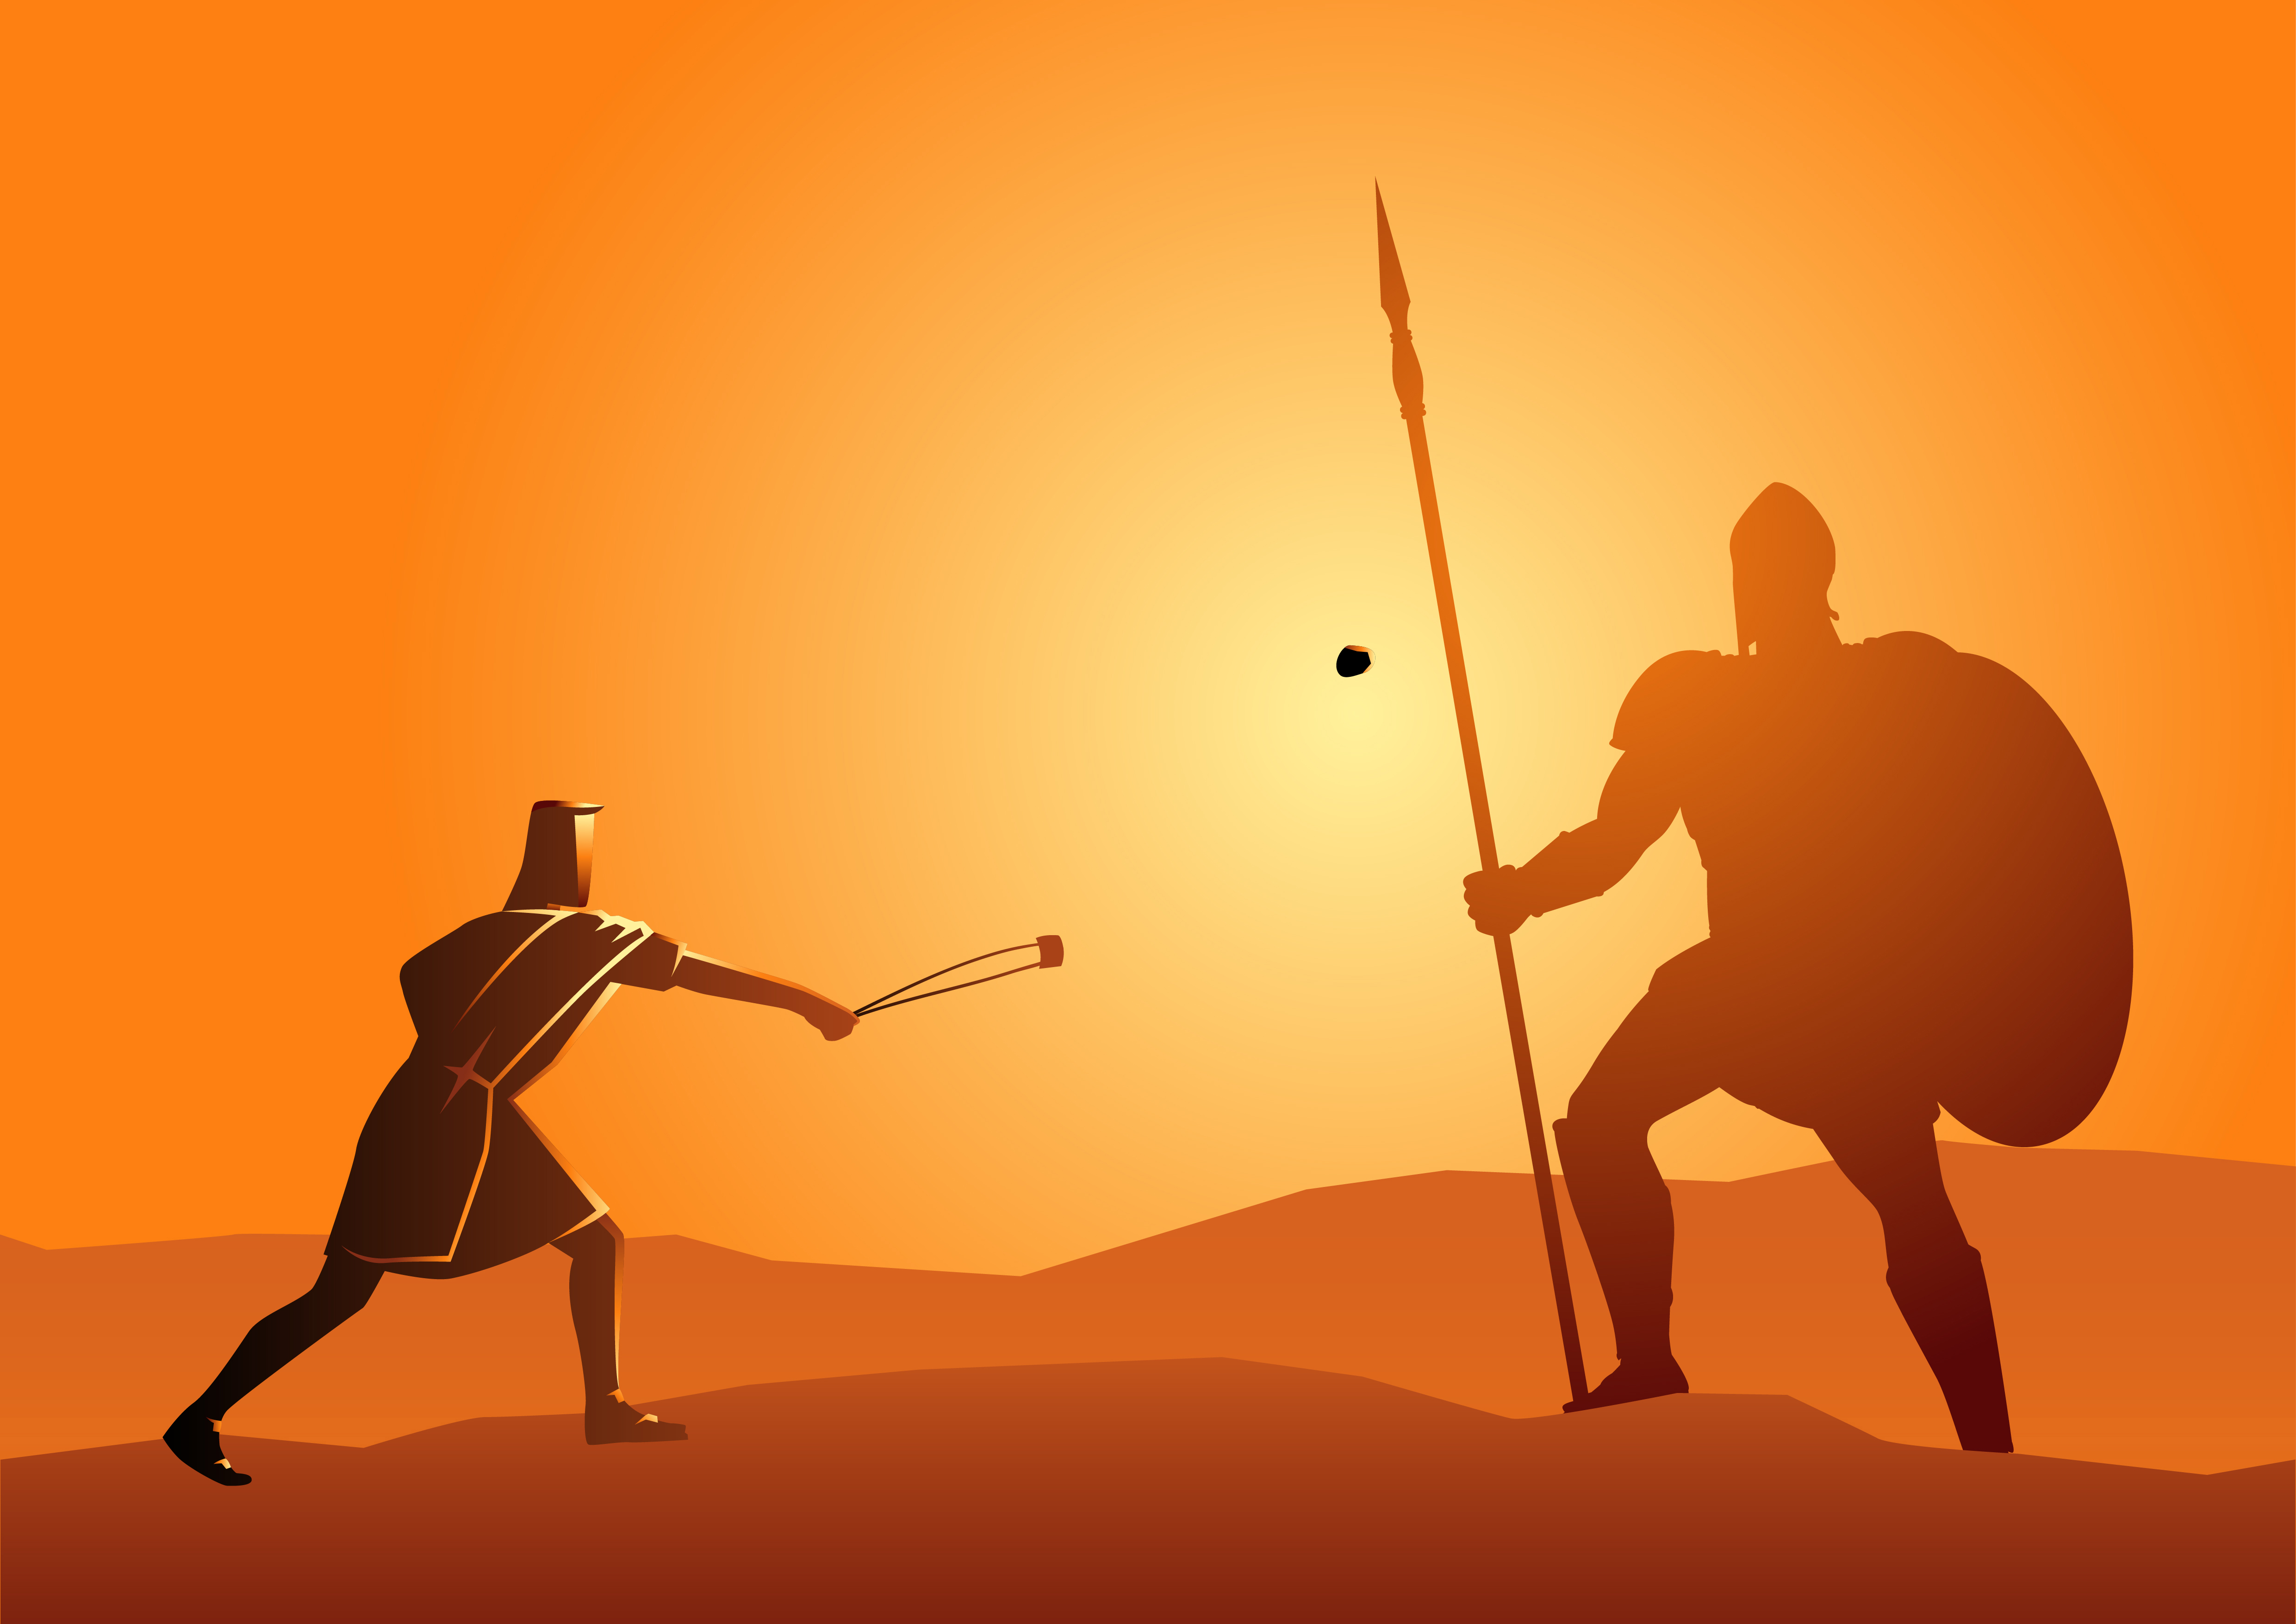 David and goliath story